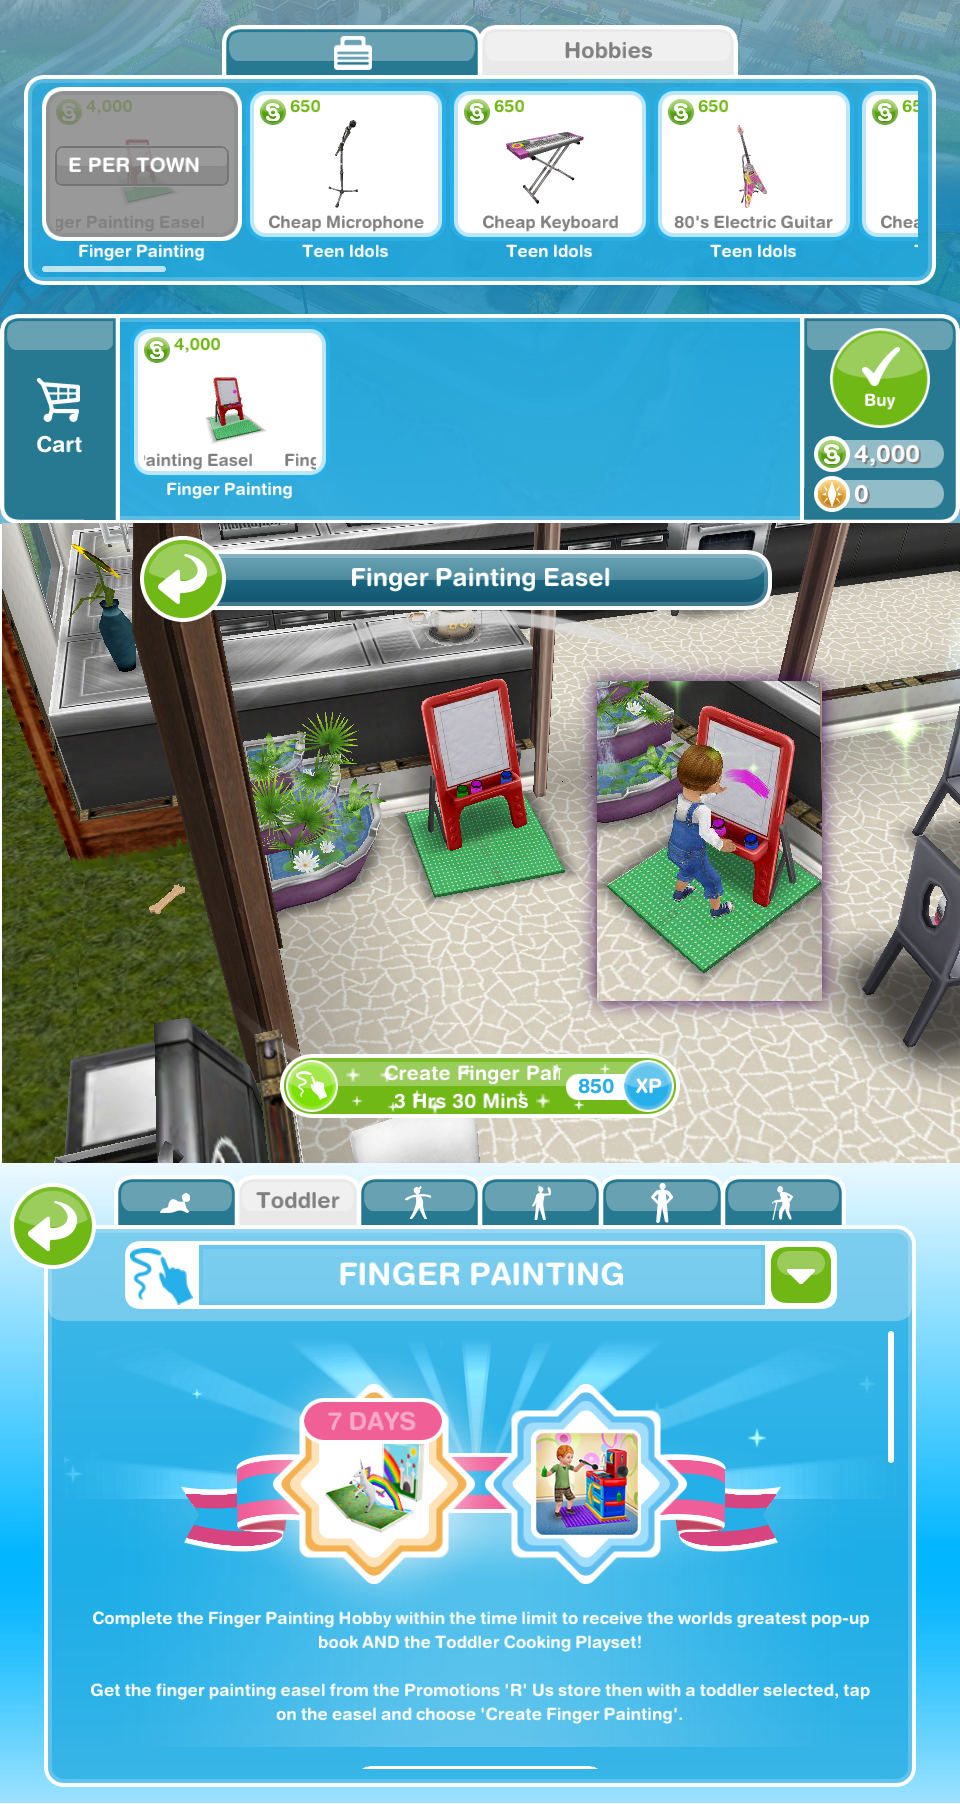 finger_painting_hobby.png